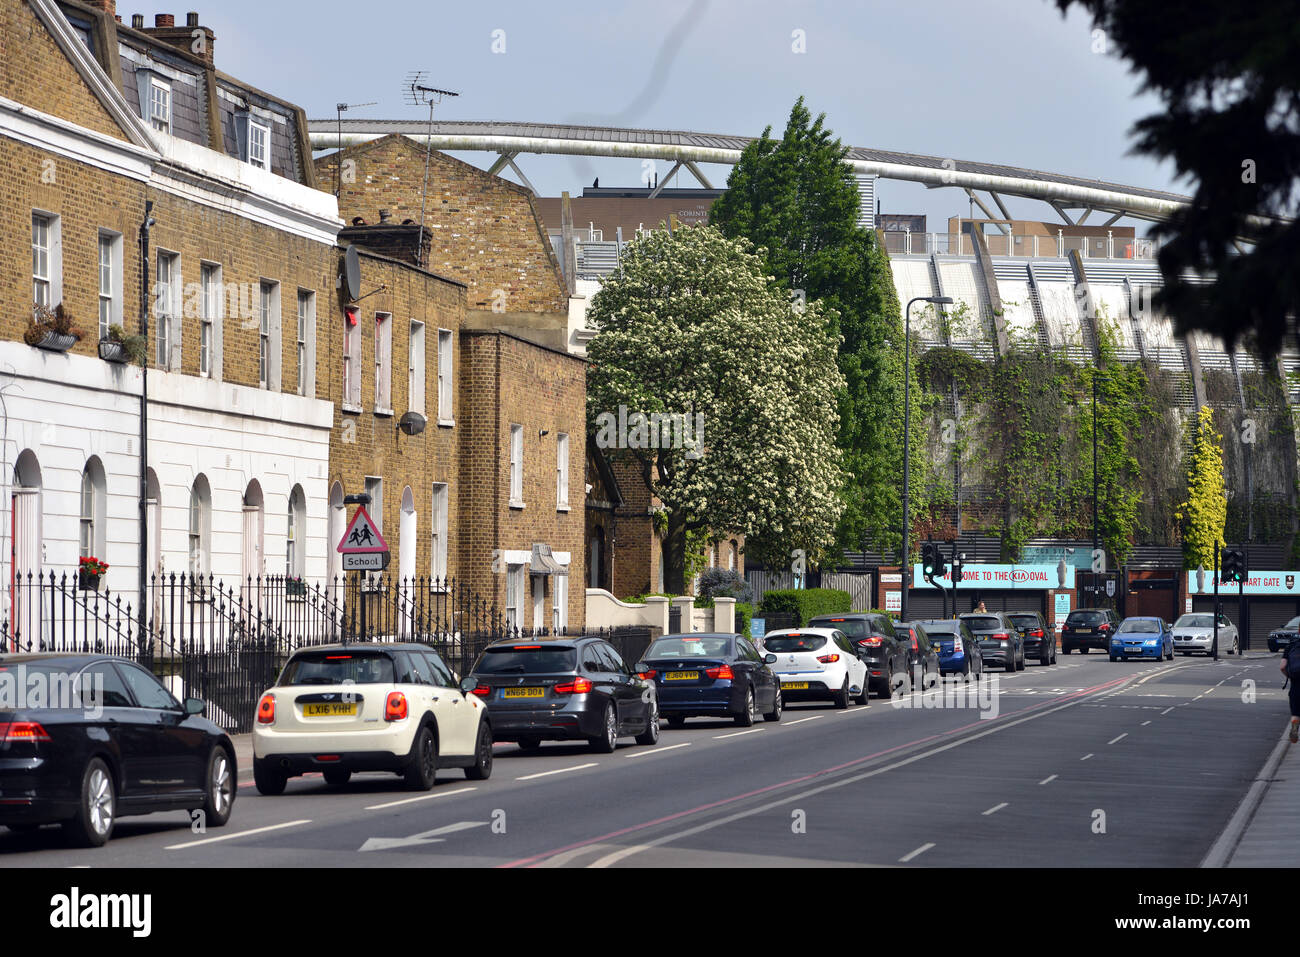 L'Oval Cricket Ground, London Banque D'Images